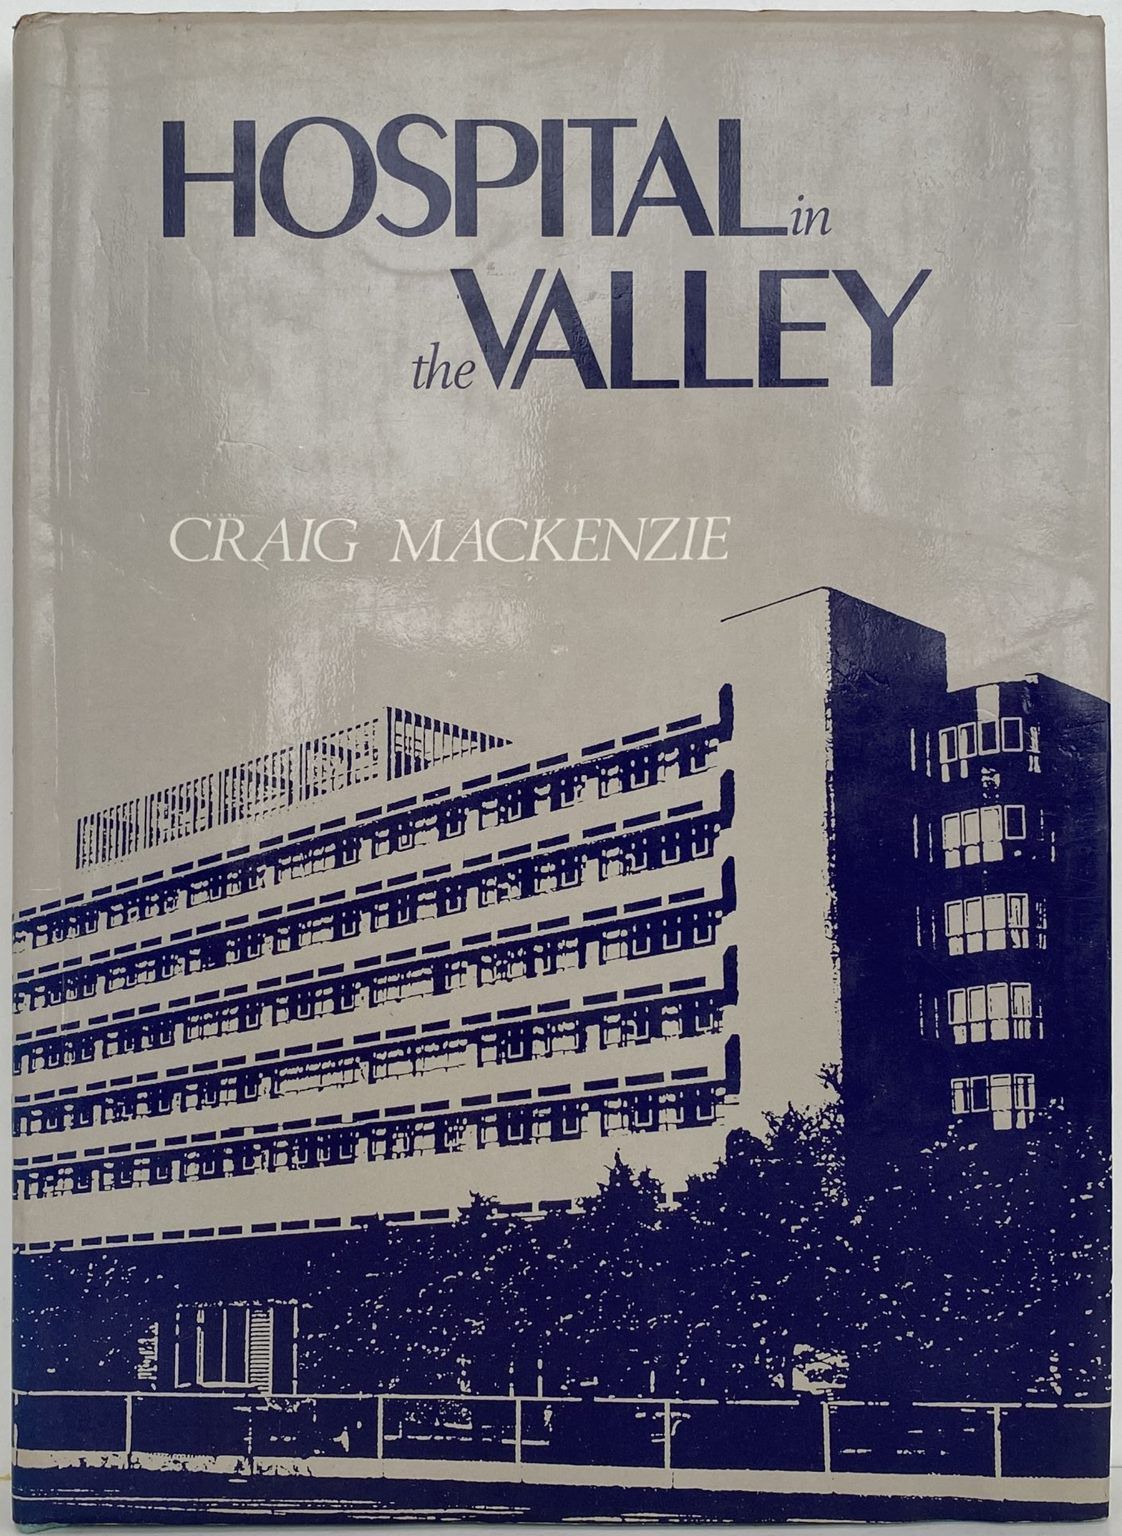 HOSPITAL IN THE VALLEY